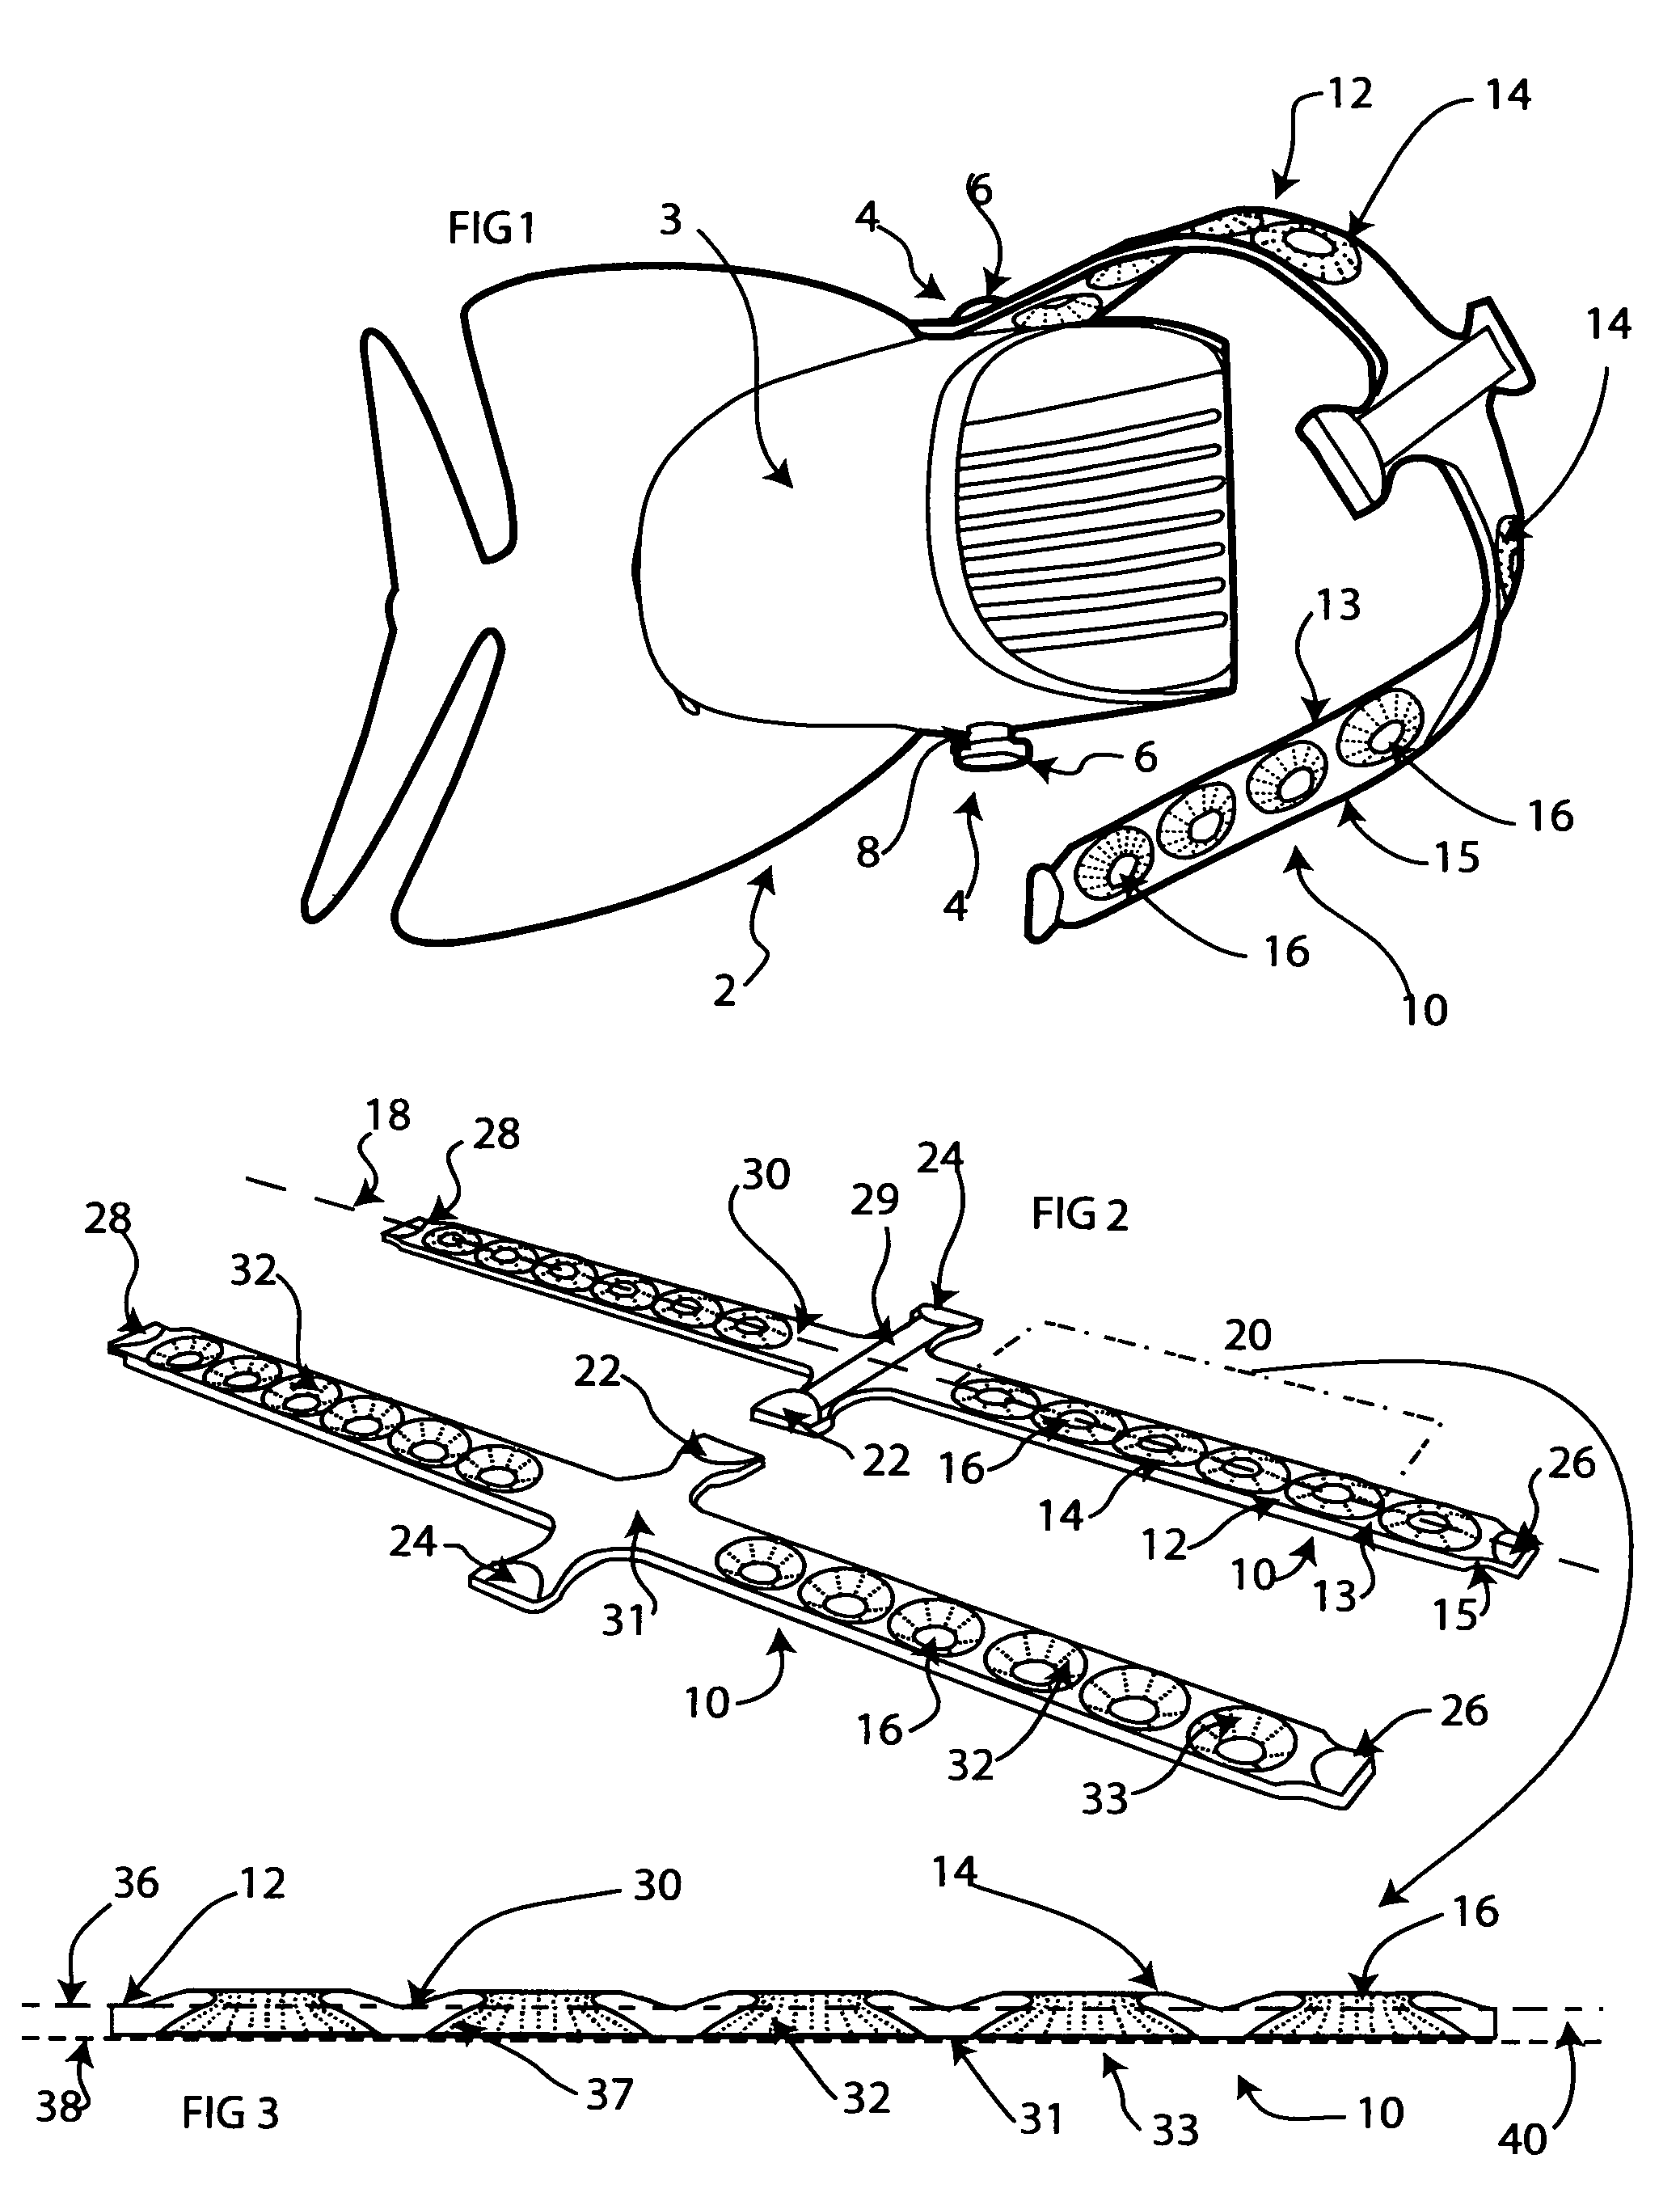 Multi-use adjustable bellows-shaped aperture strap